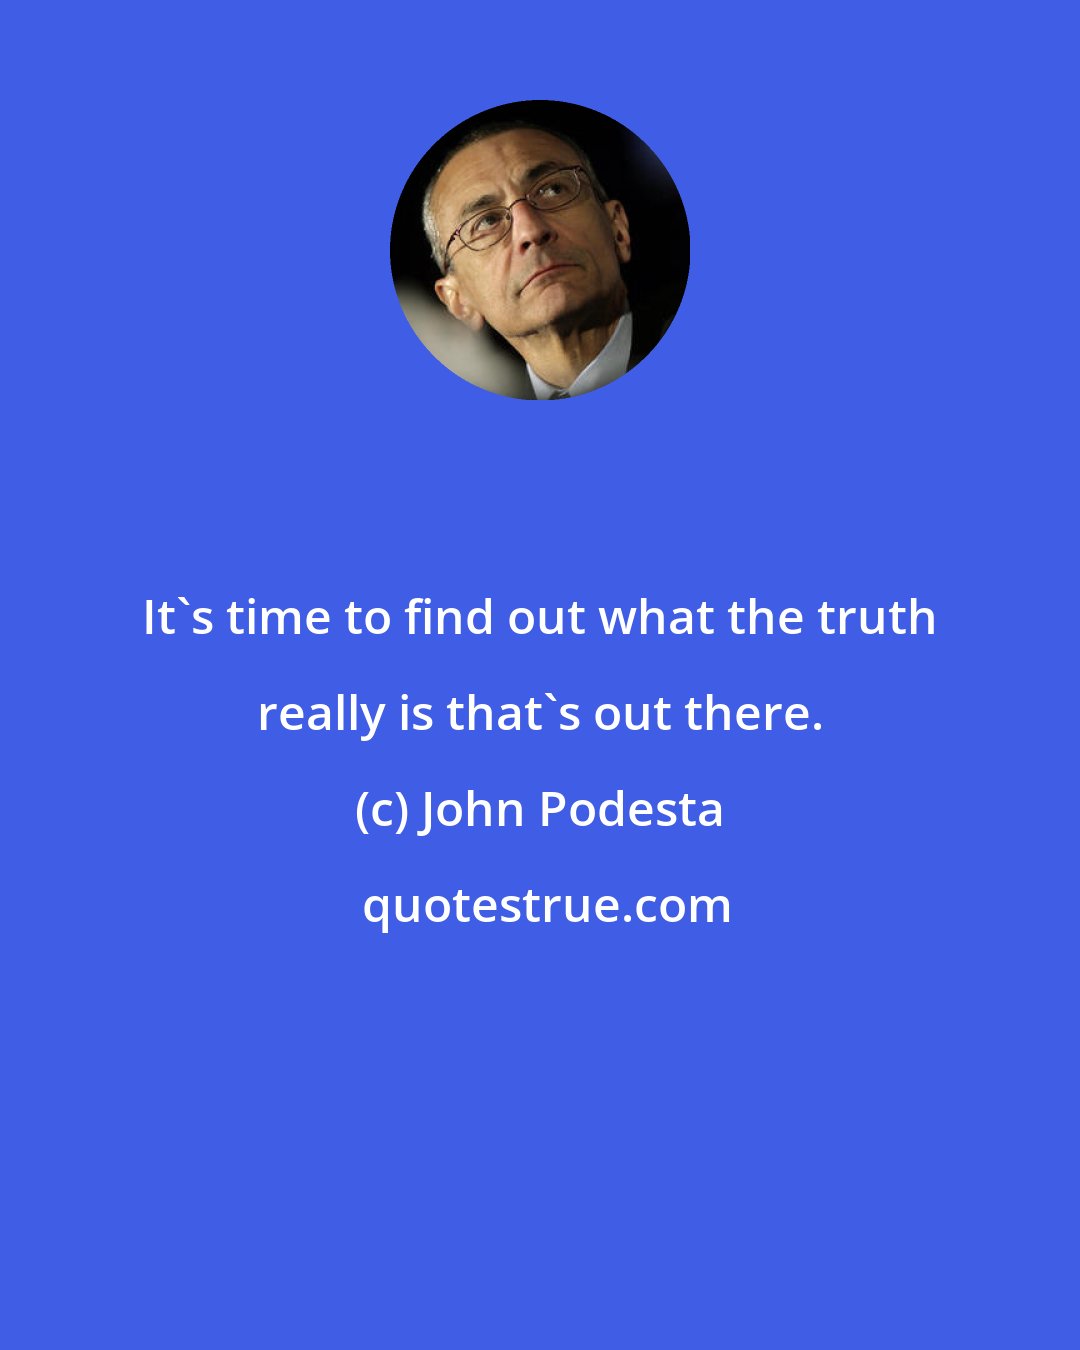 John Podesta: It's time to find out what the truth really is that's out there.